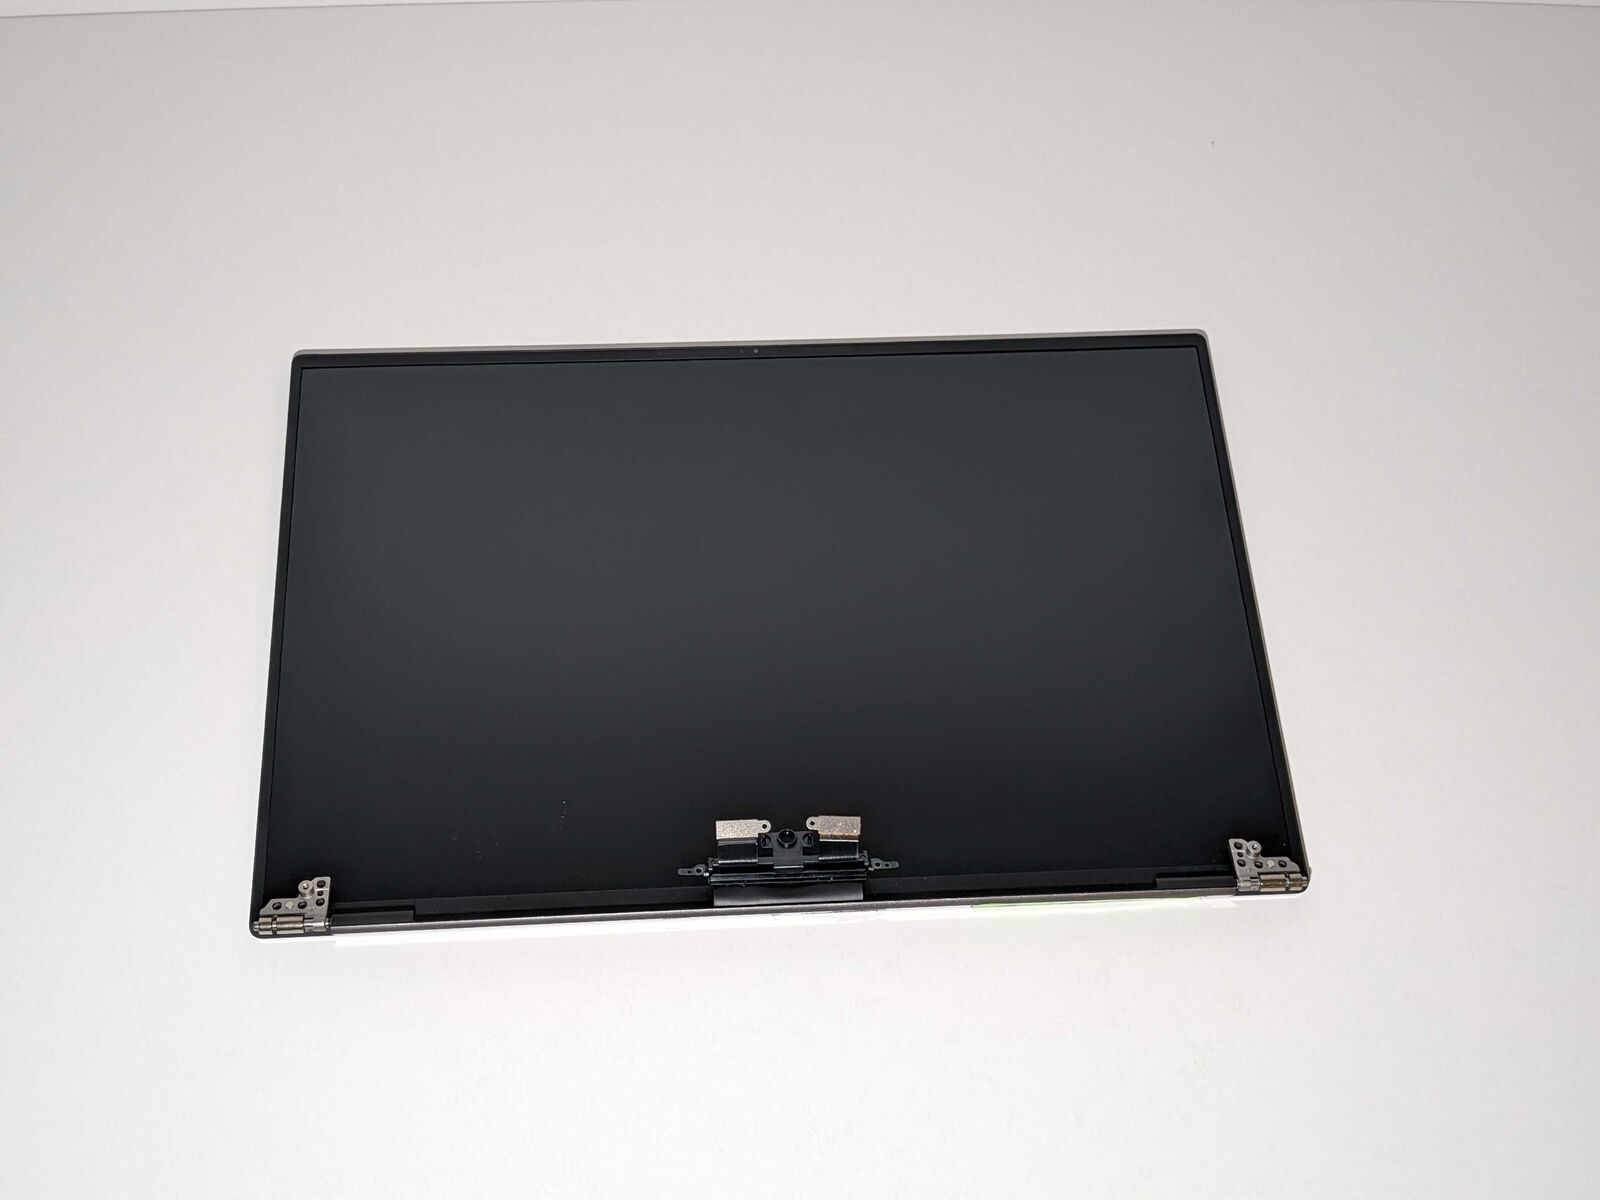 Genuine Dell Precision 5550 5560 5570 LCD Assembly 4K UHD Touch 5TRT8 DarkGray B. Available Now for $149.95